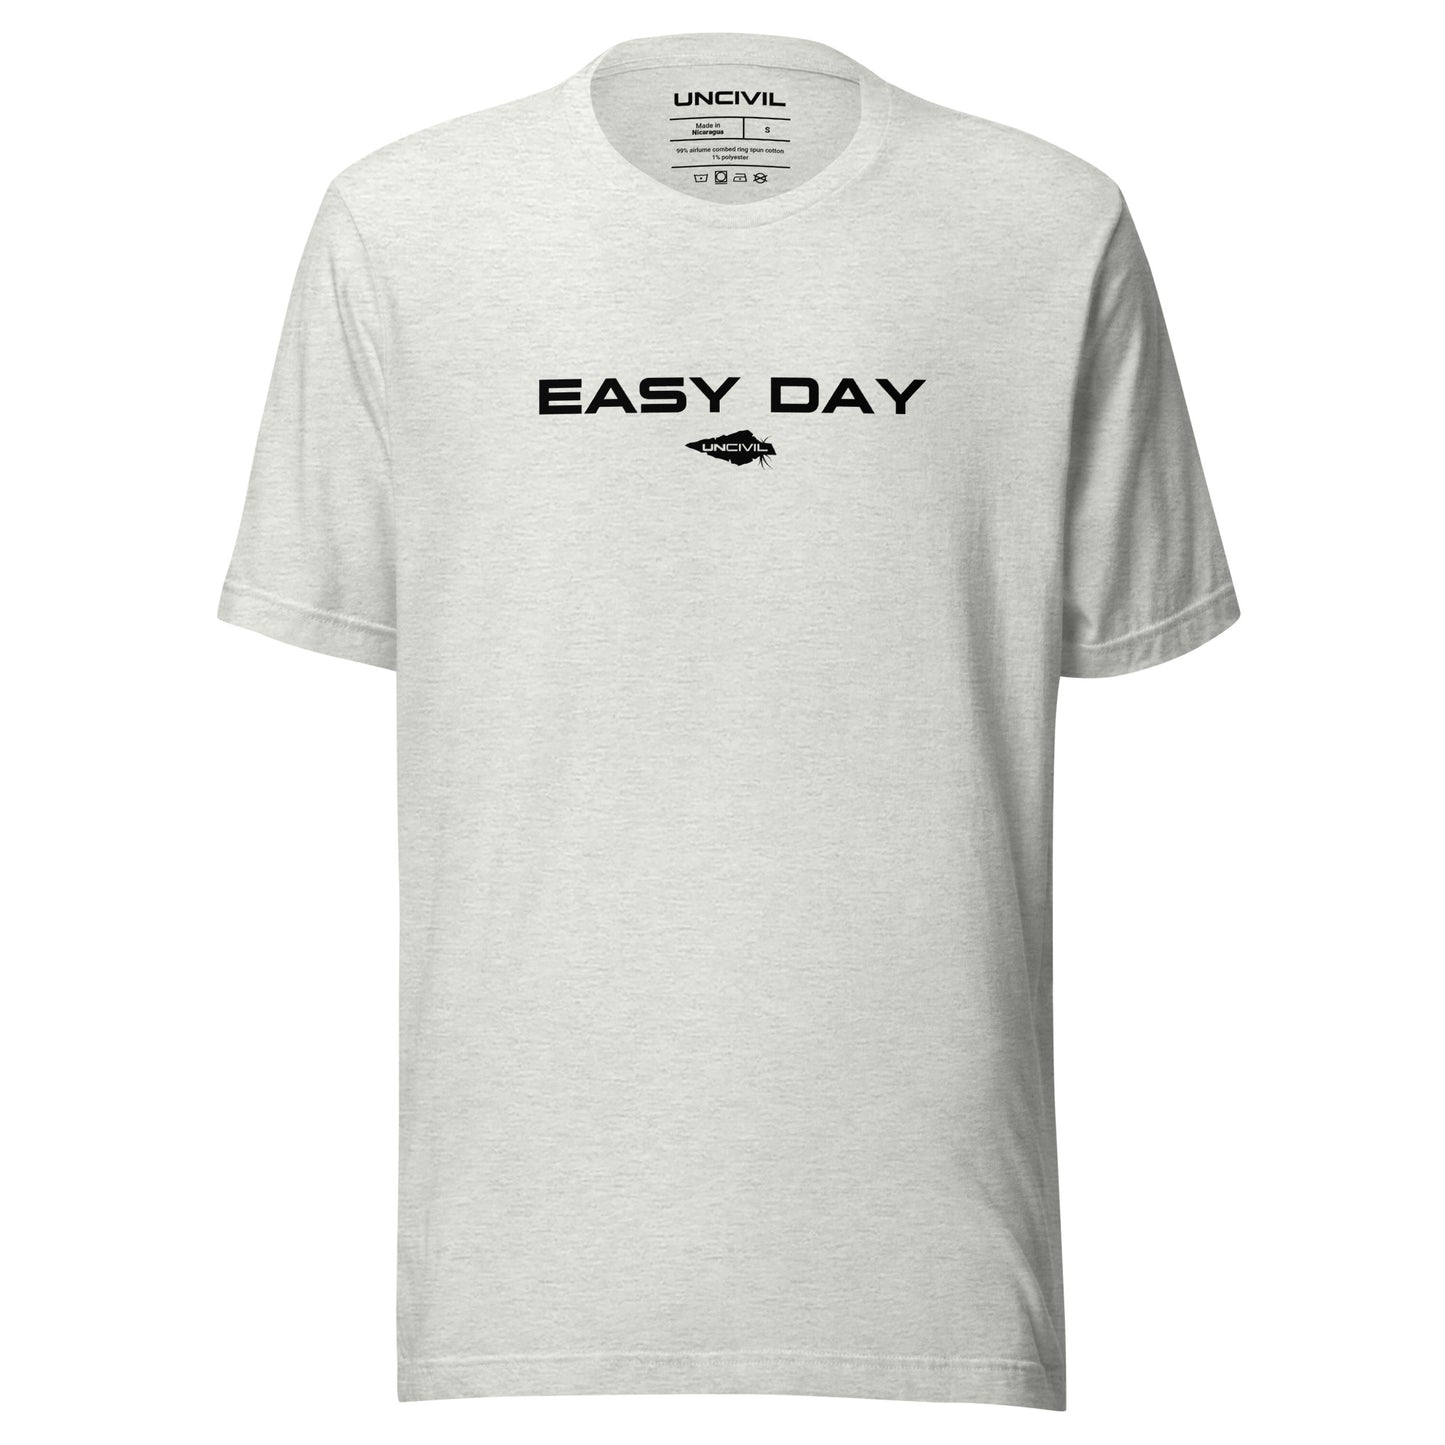 Easy Day UNCIVIL Tee, inspired by the Navy Seals phrase "Easy Day". Grey Ash men's shirt.